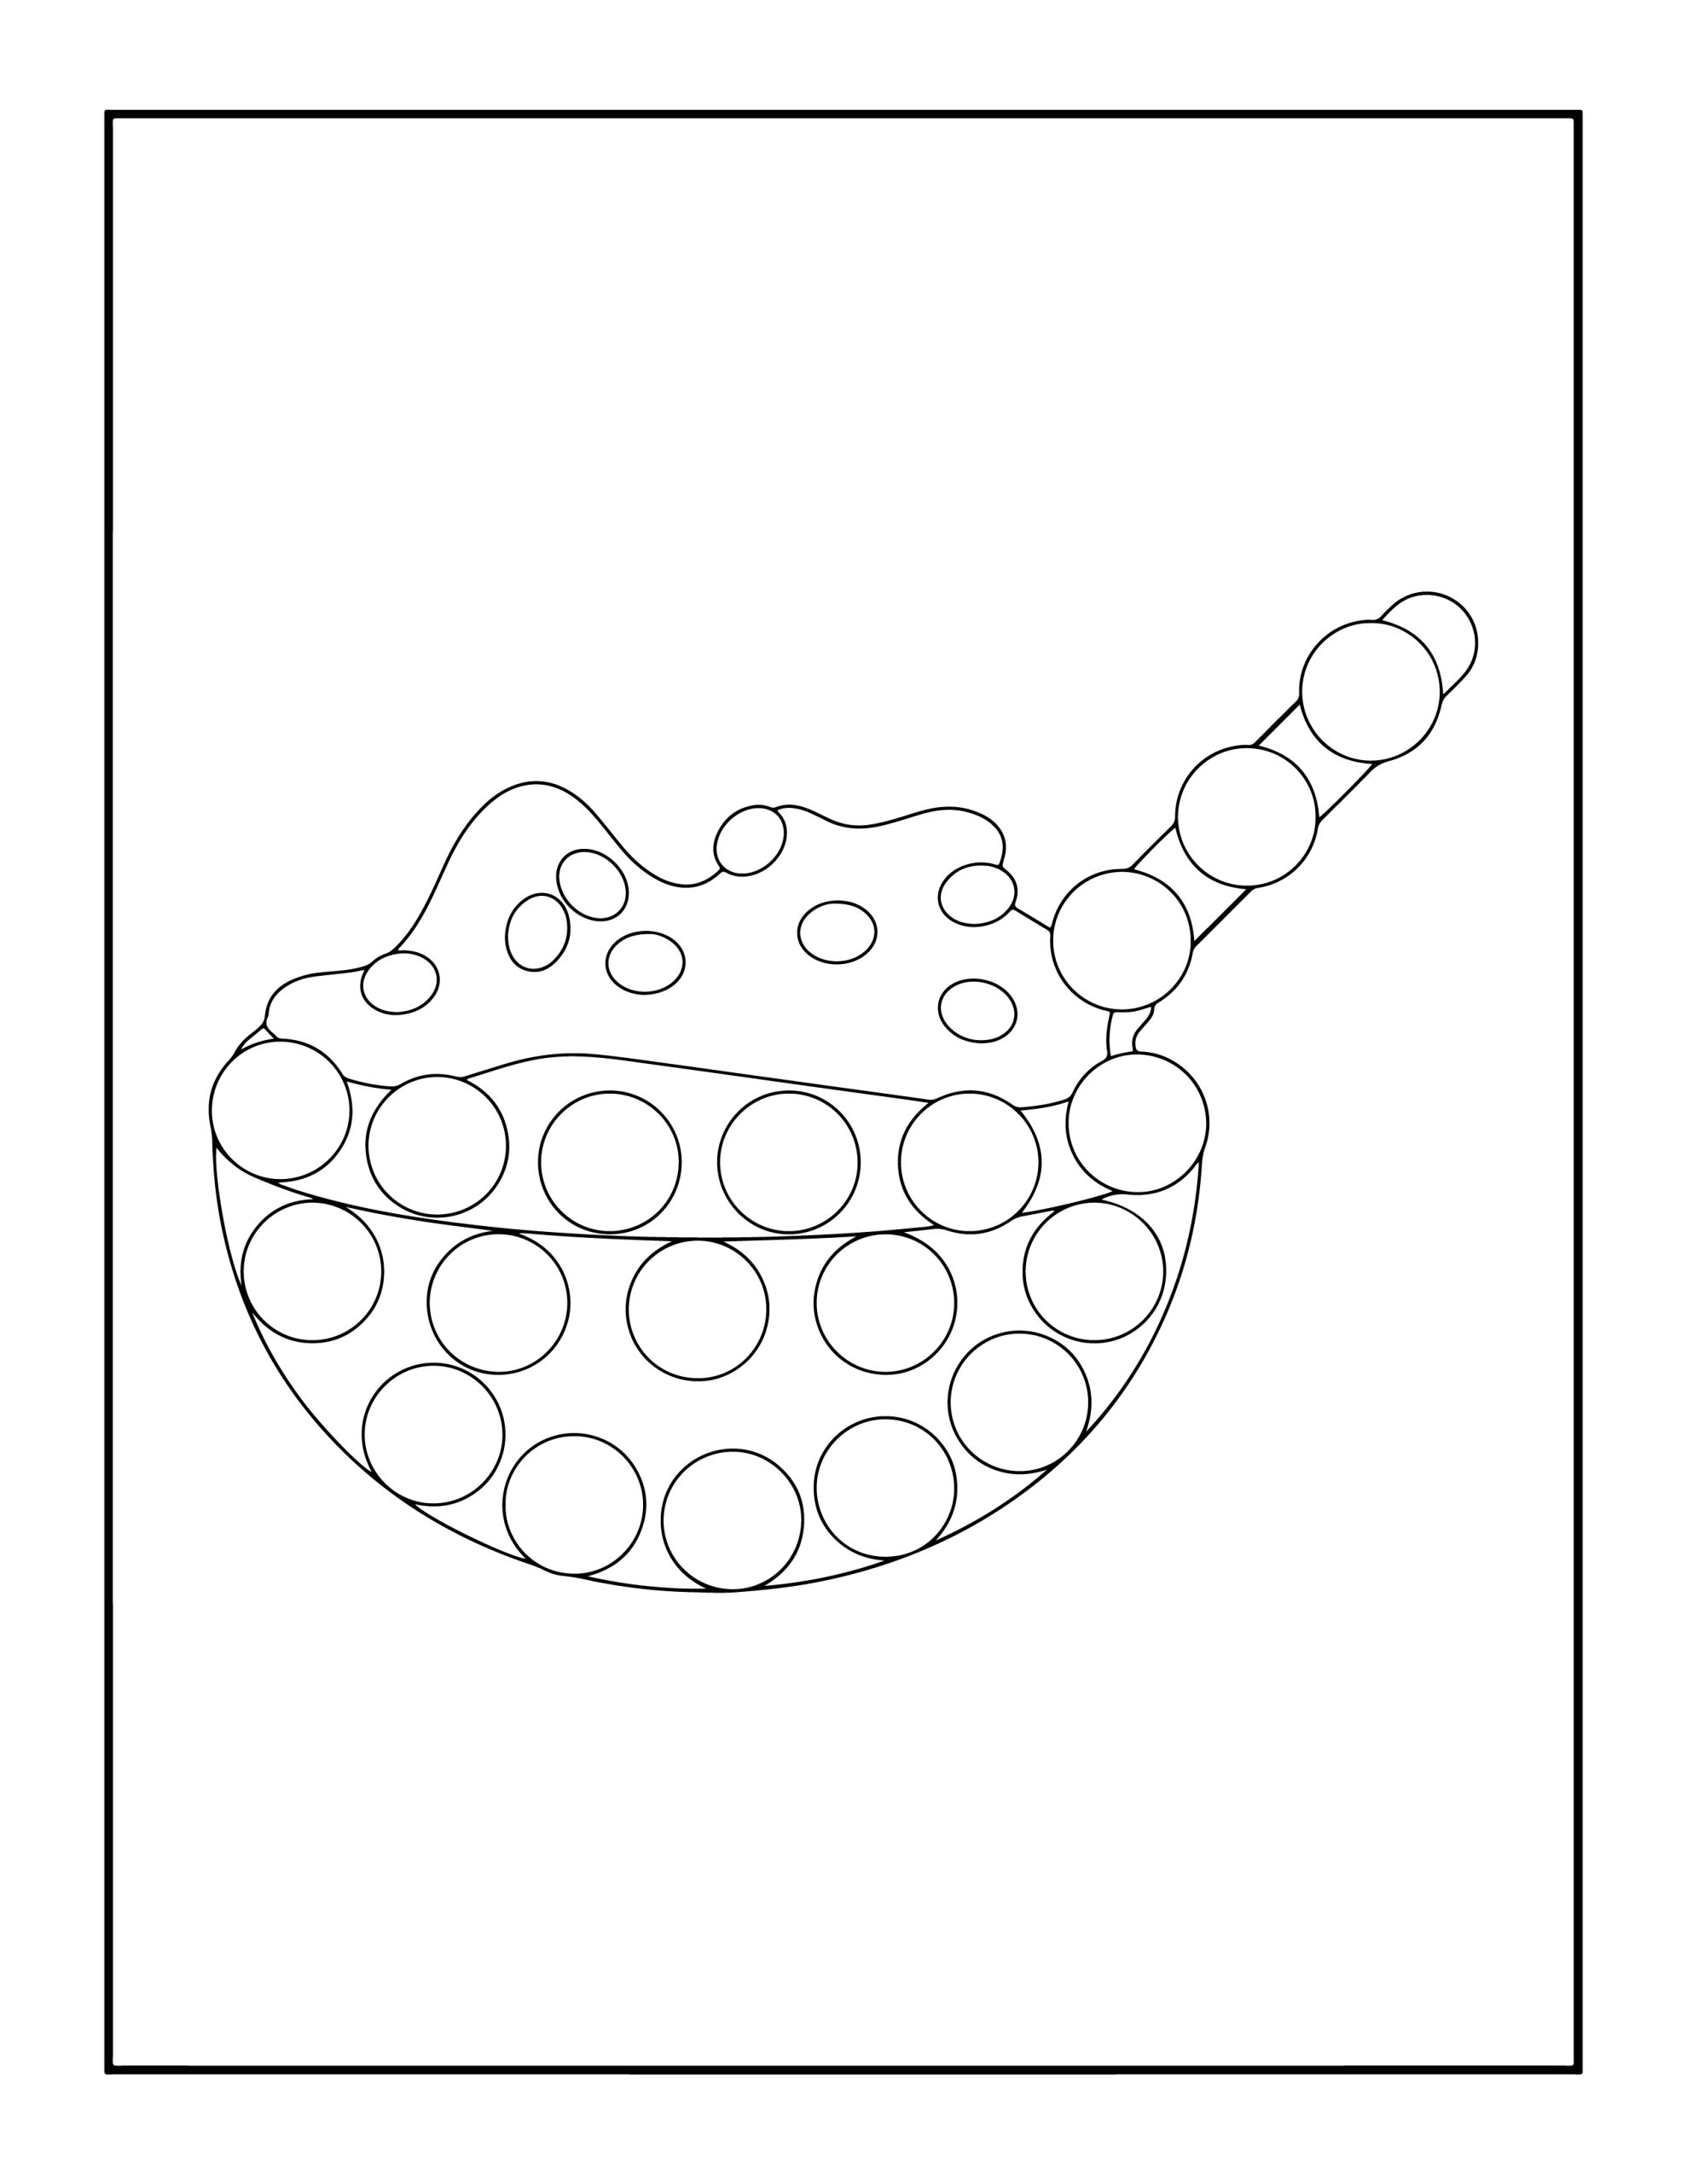 Thanksgiving coloring pages dot marker and activities turkey directed drawing made by teachers